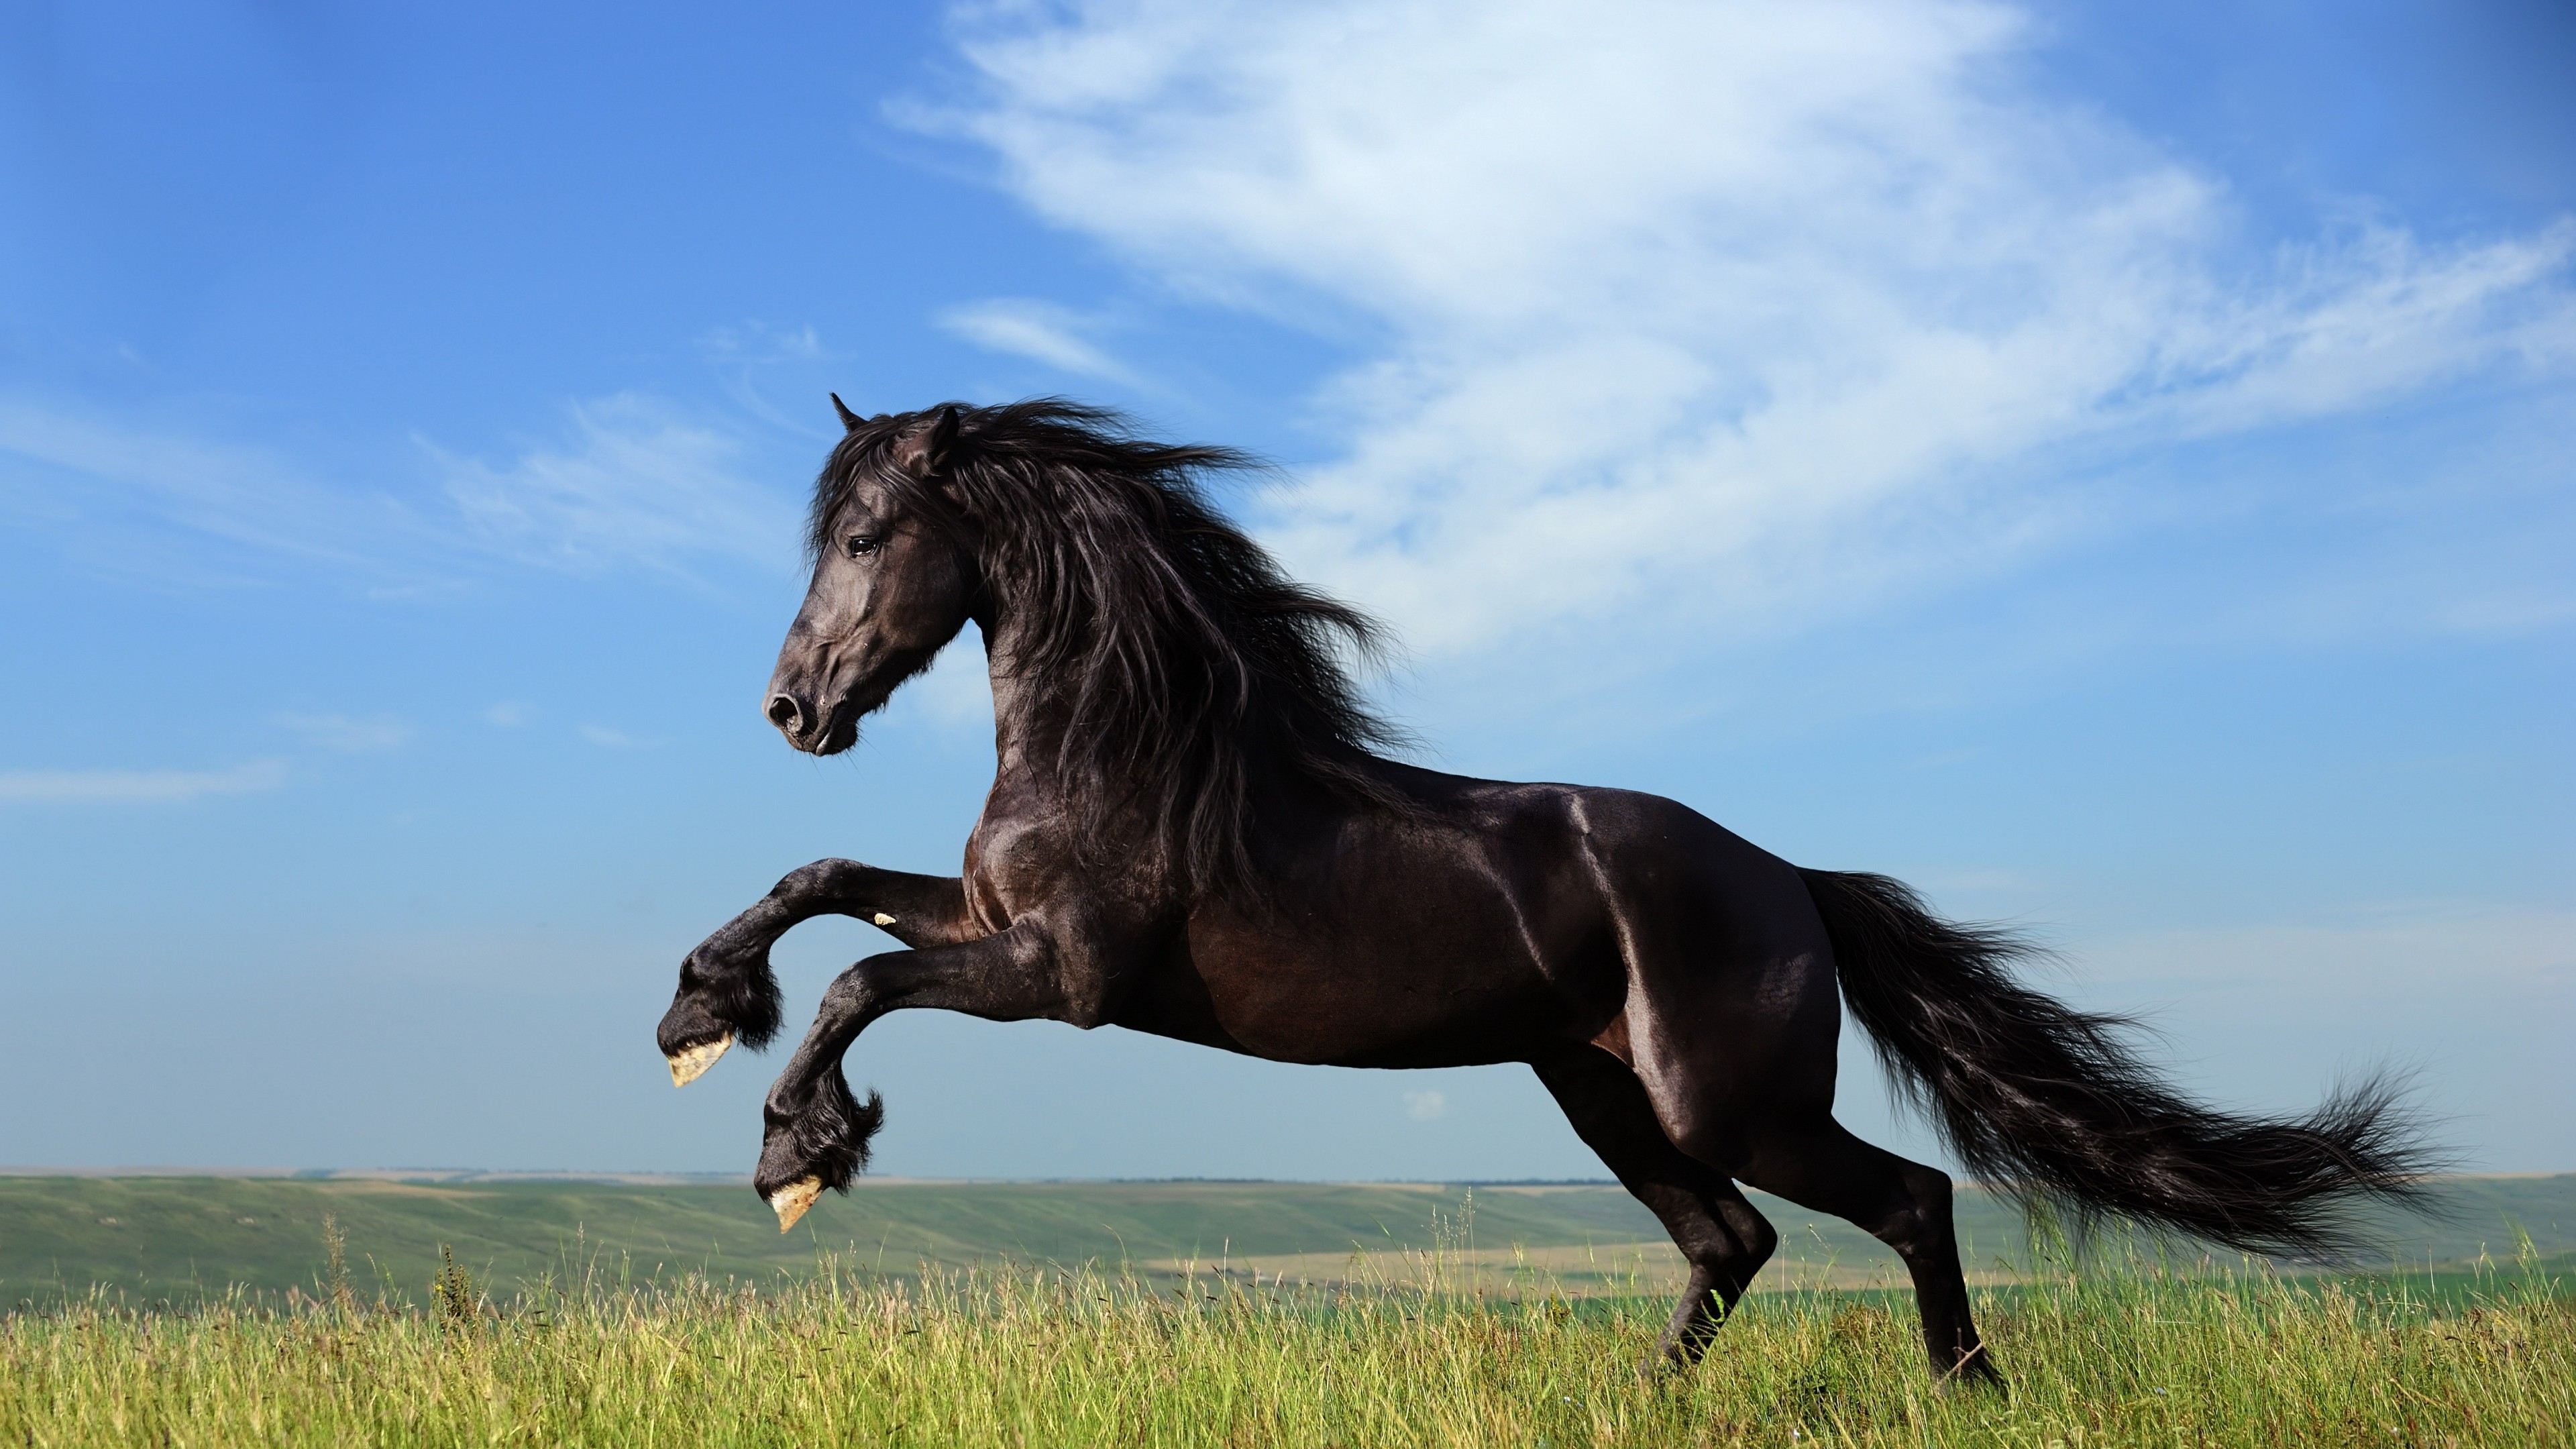 2560x1440 Horse Jump 1440p Resolution Hd 4k Wallpapers Images Backgrounds Photos And Pictures